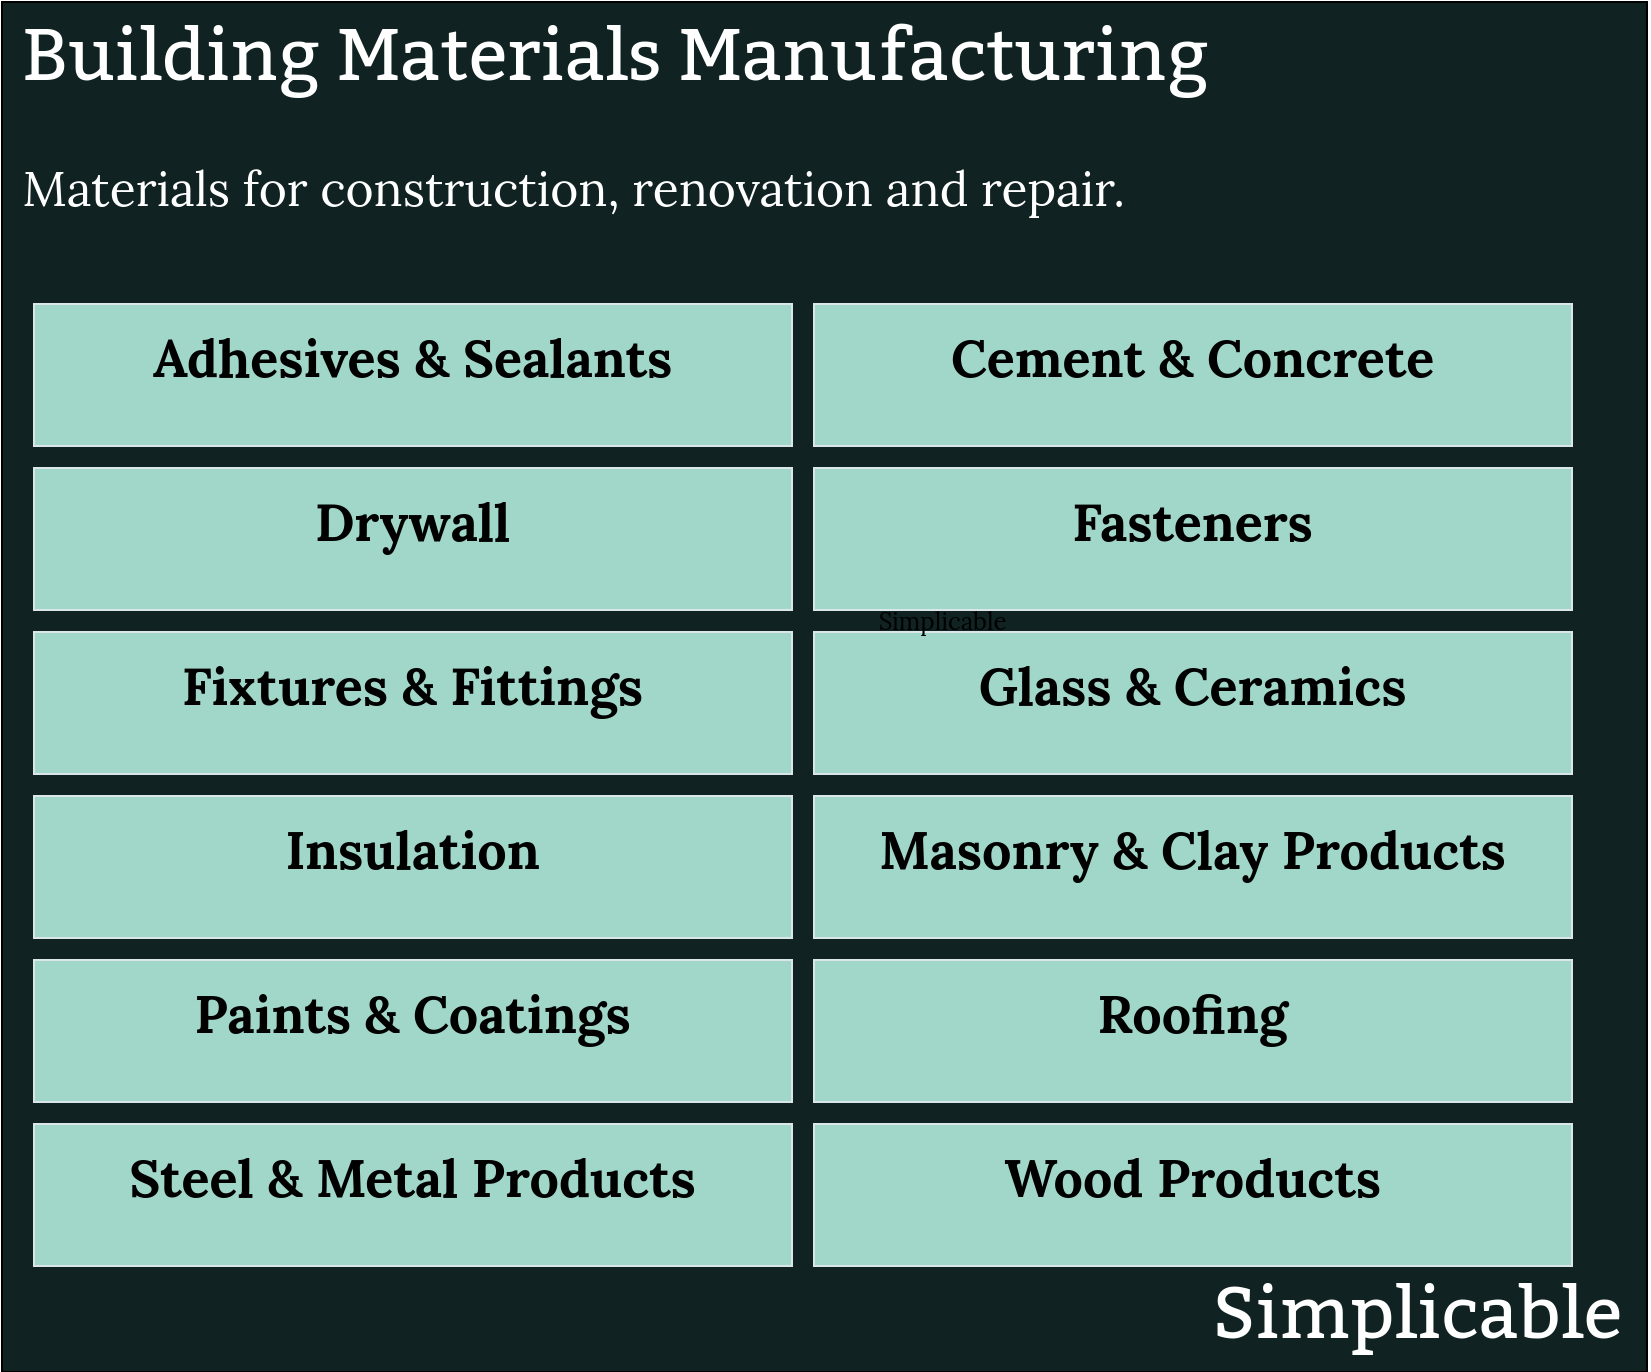 Building Materials Manufacturing examples